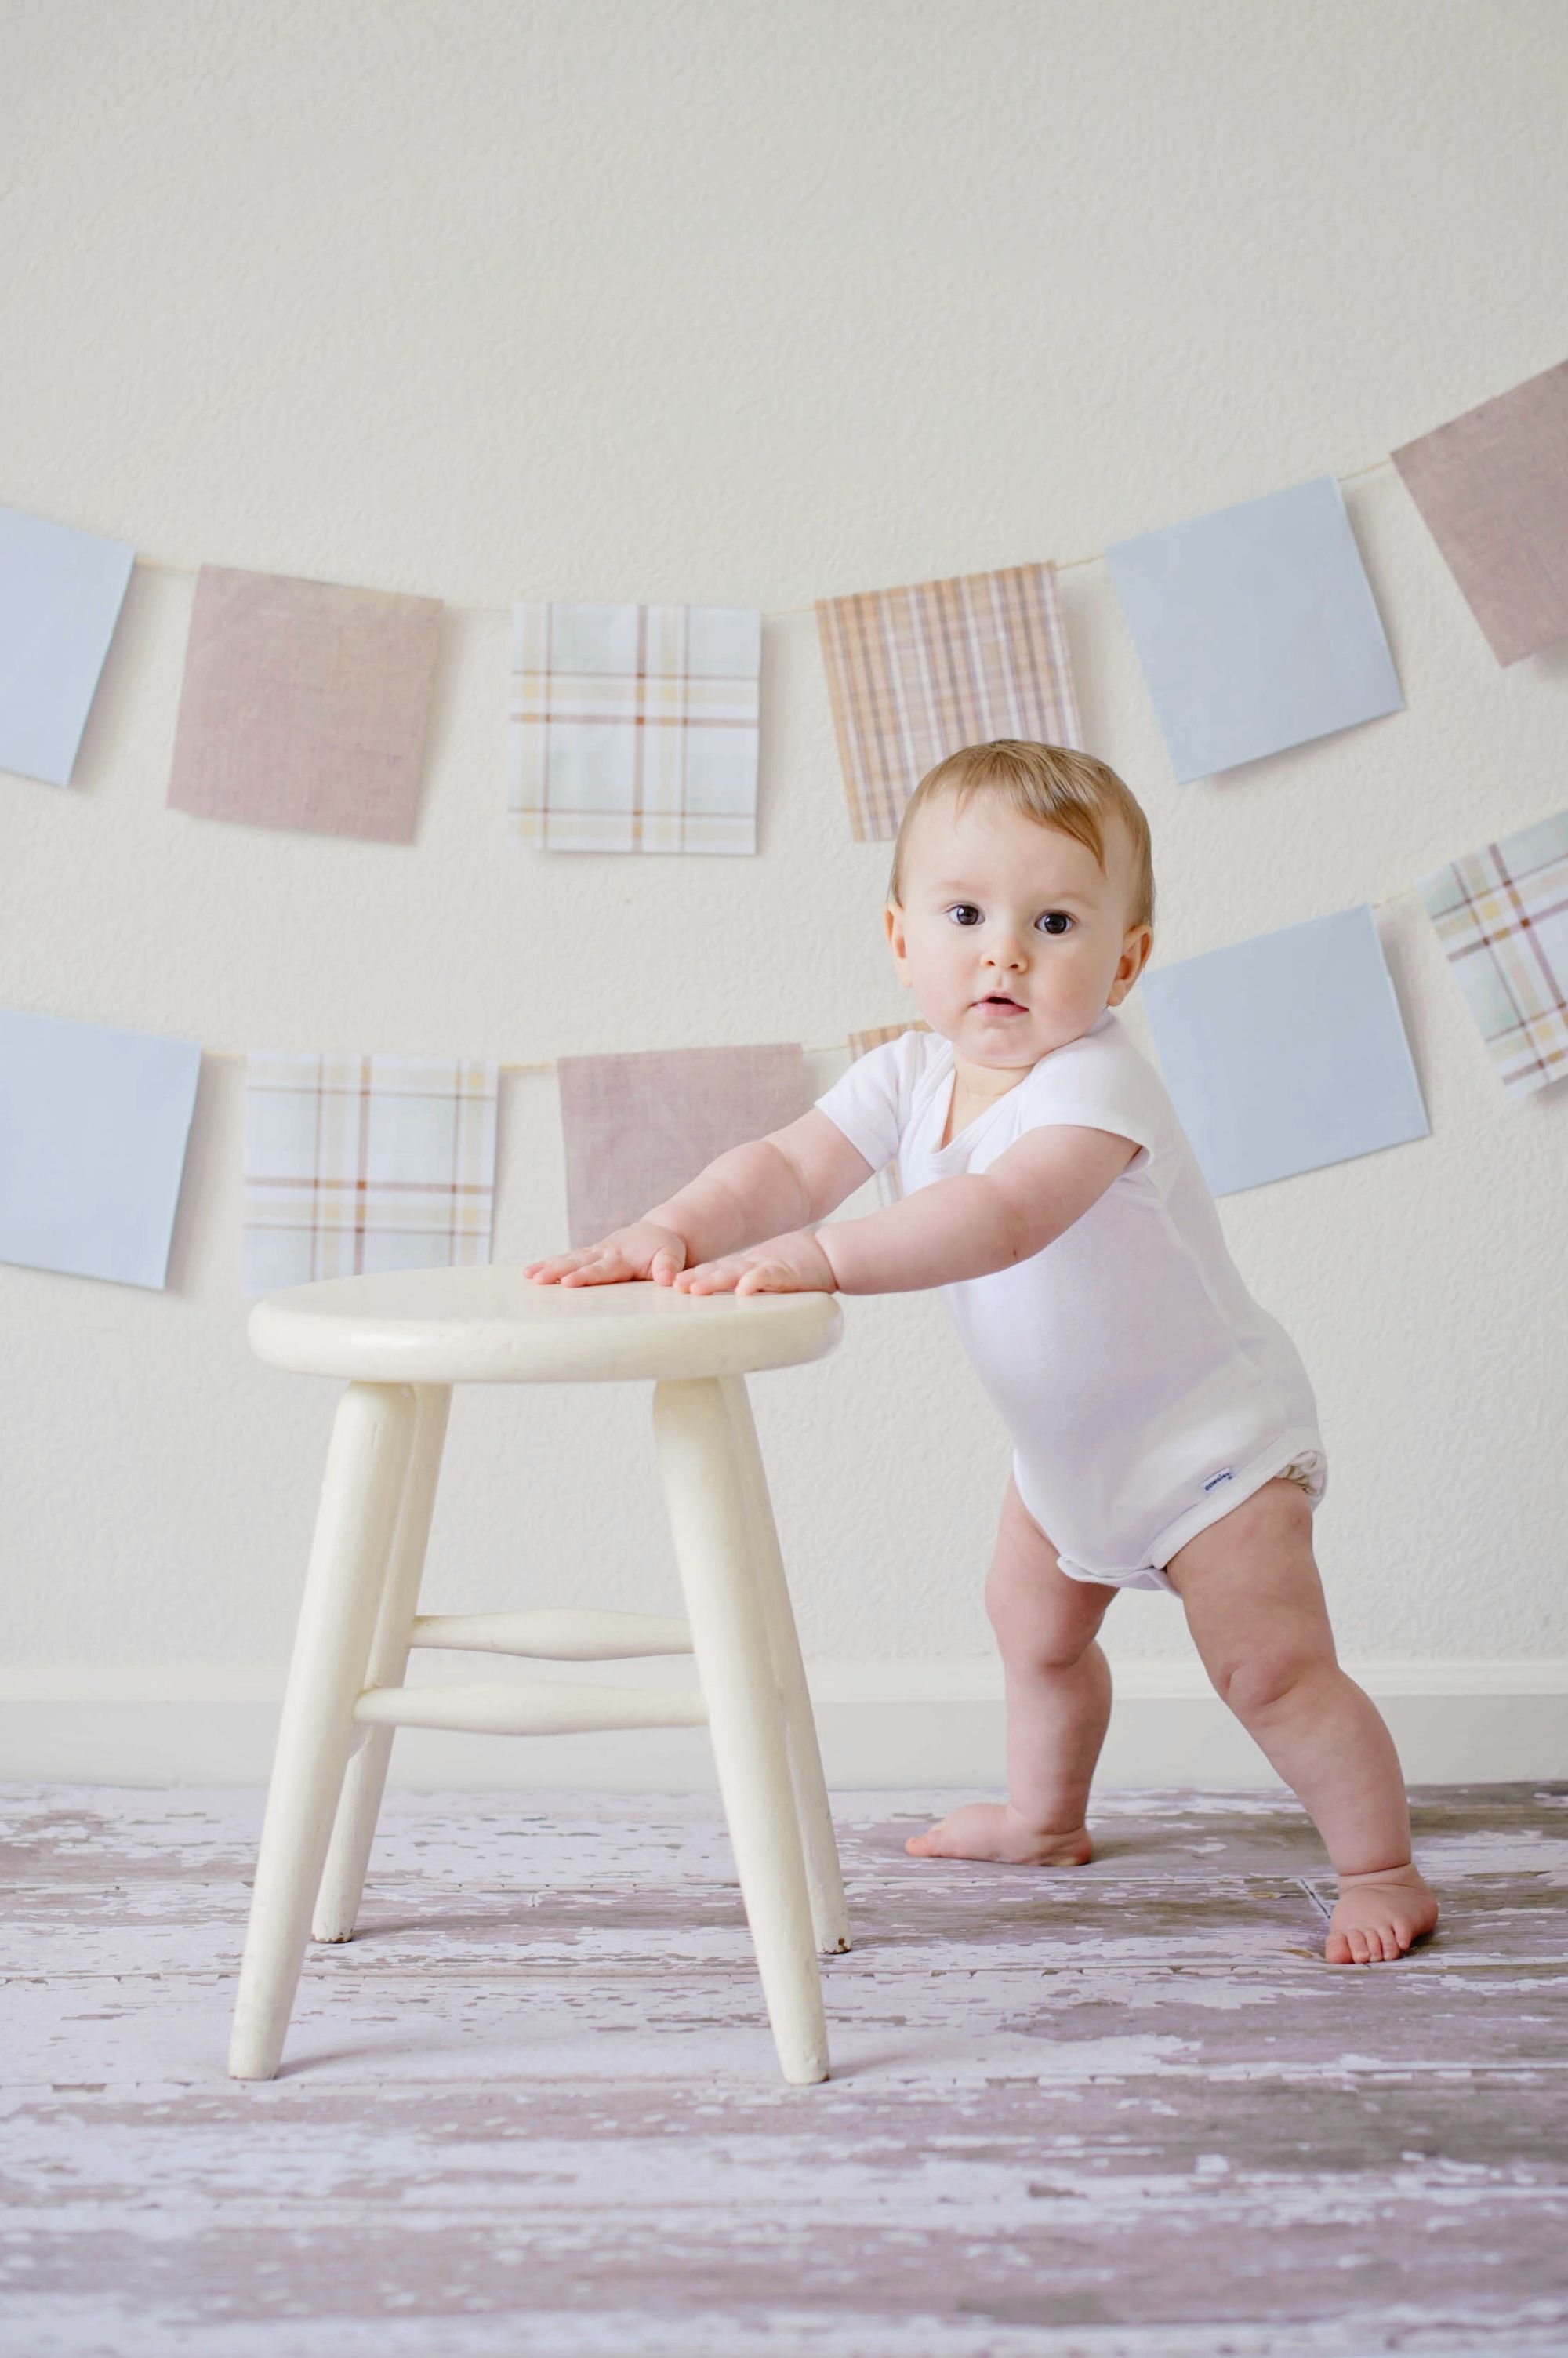 Why You Should Monitor Your Baby's Growth at Home